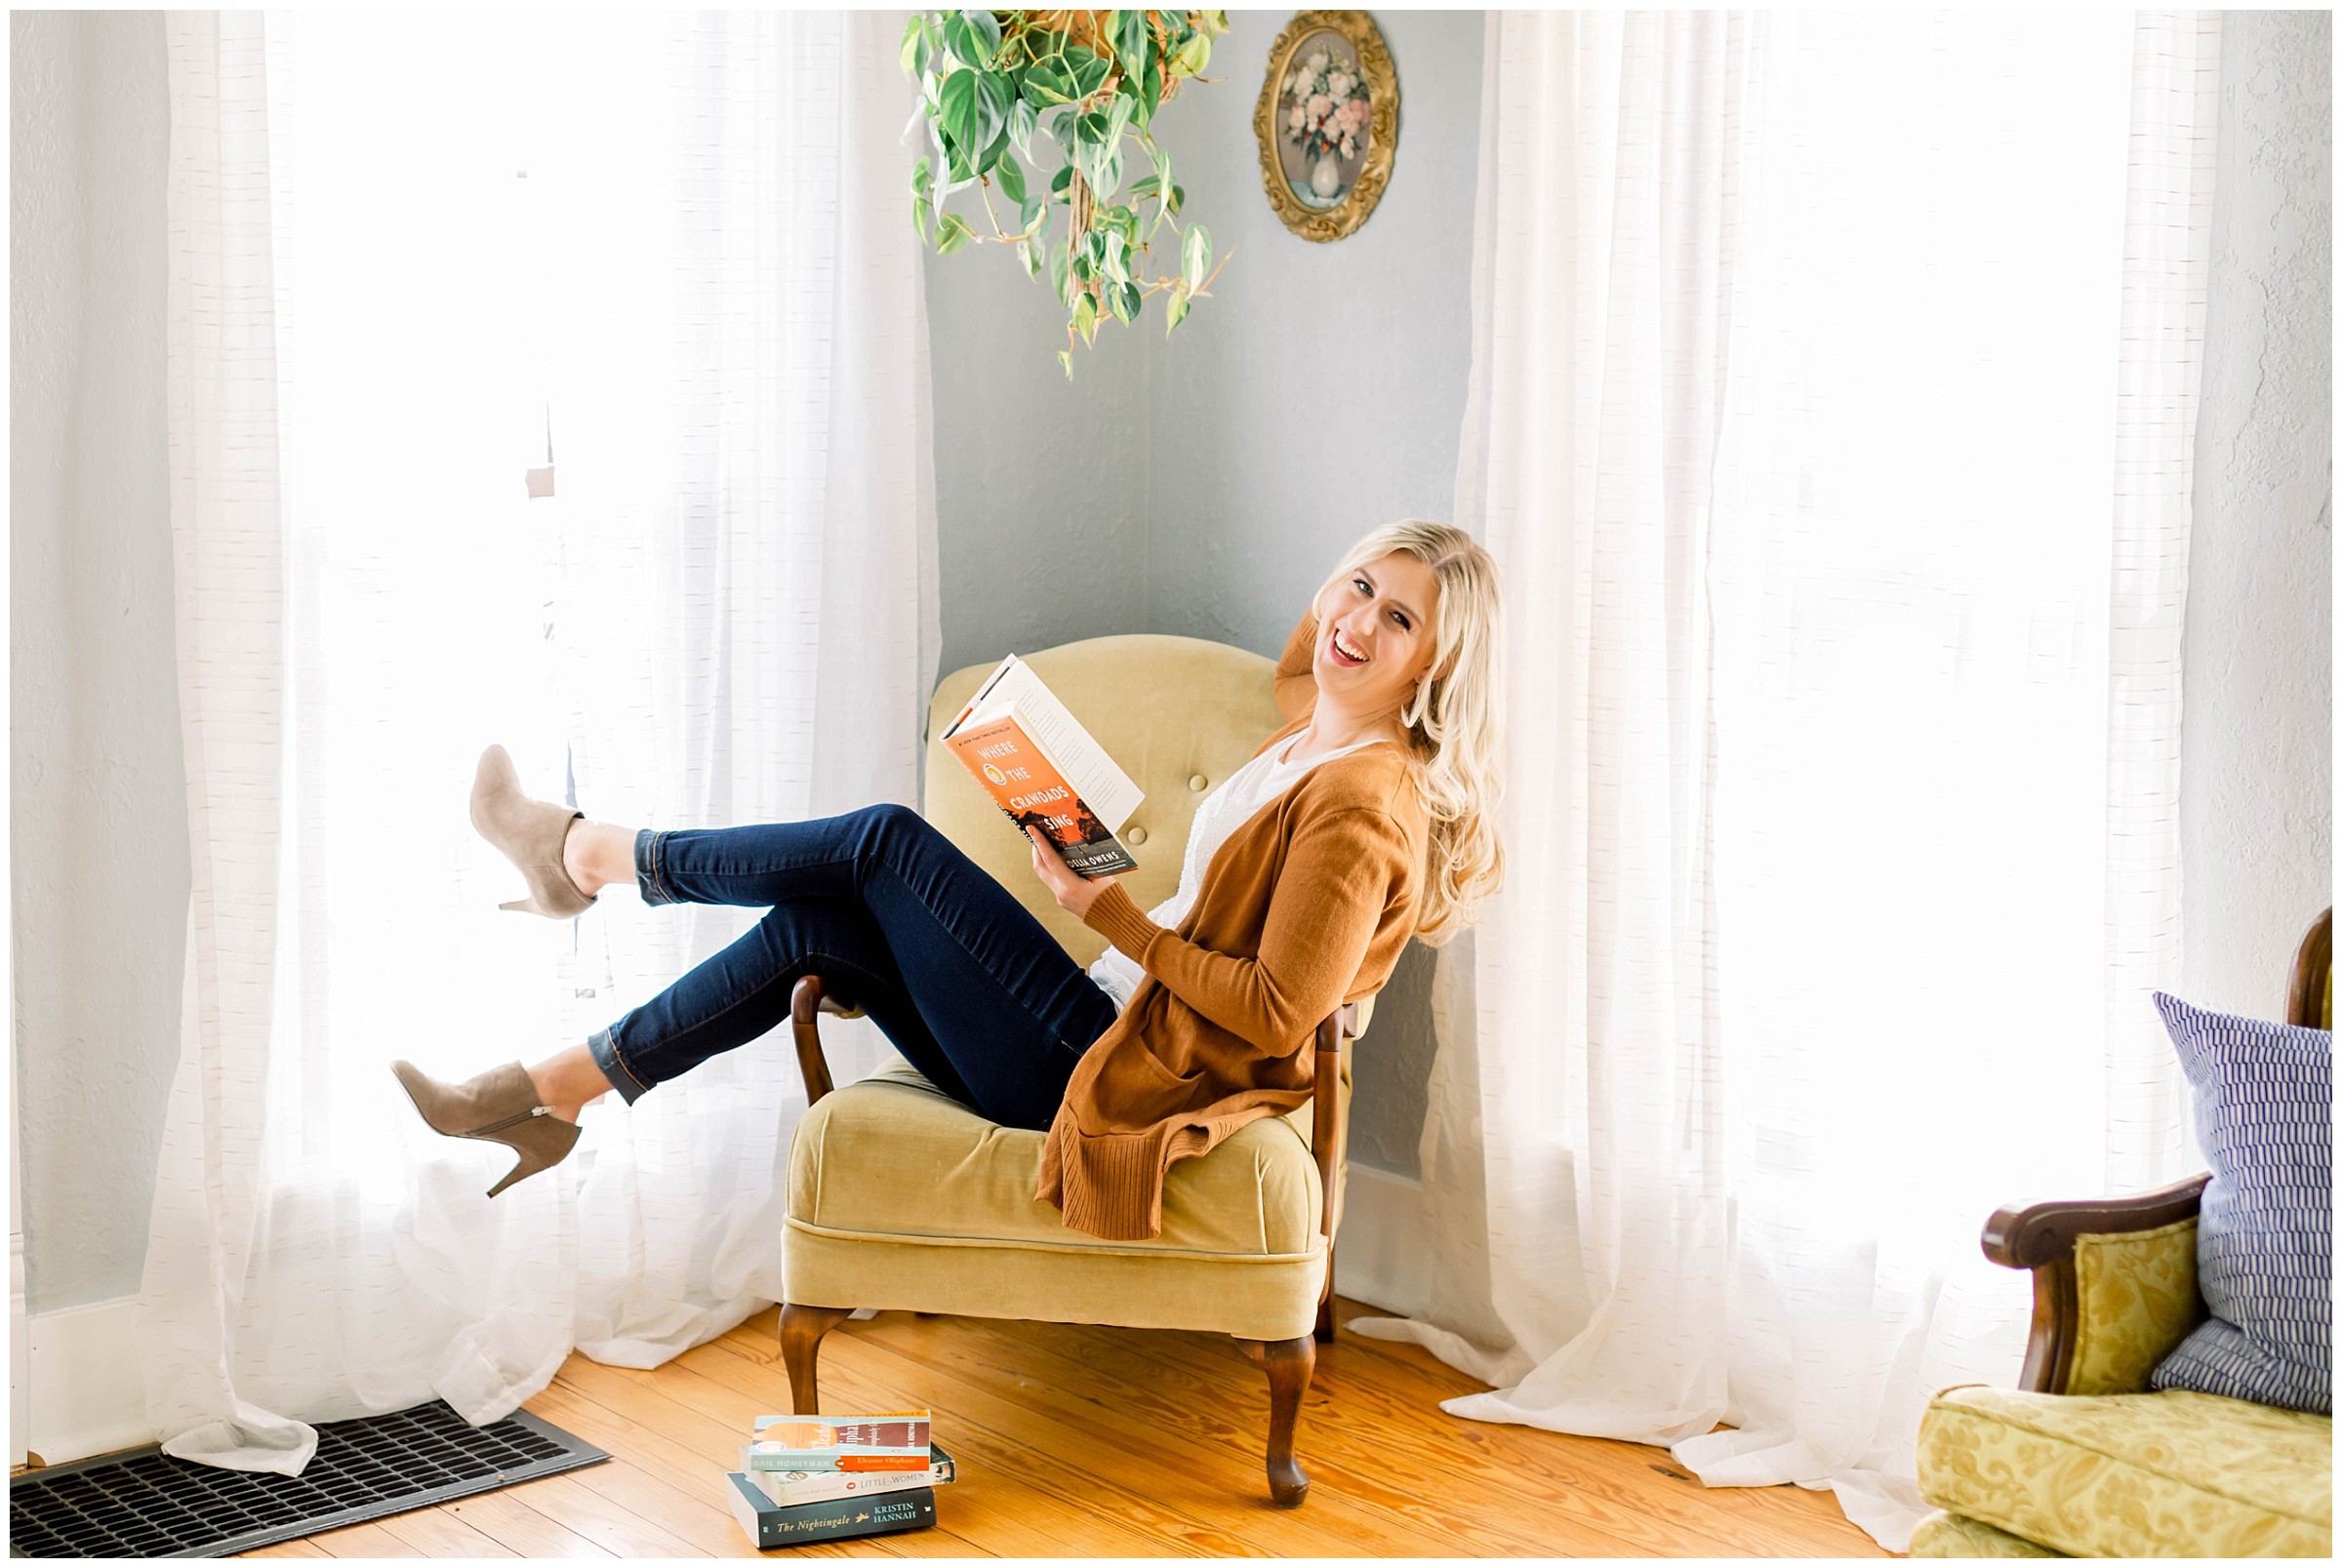 Woman sitting on chair laughing reading a book during a brand photography session